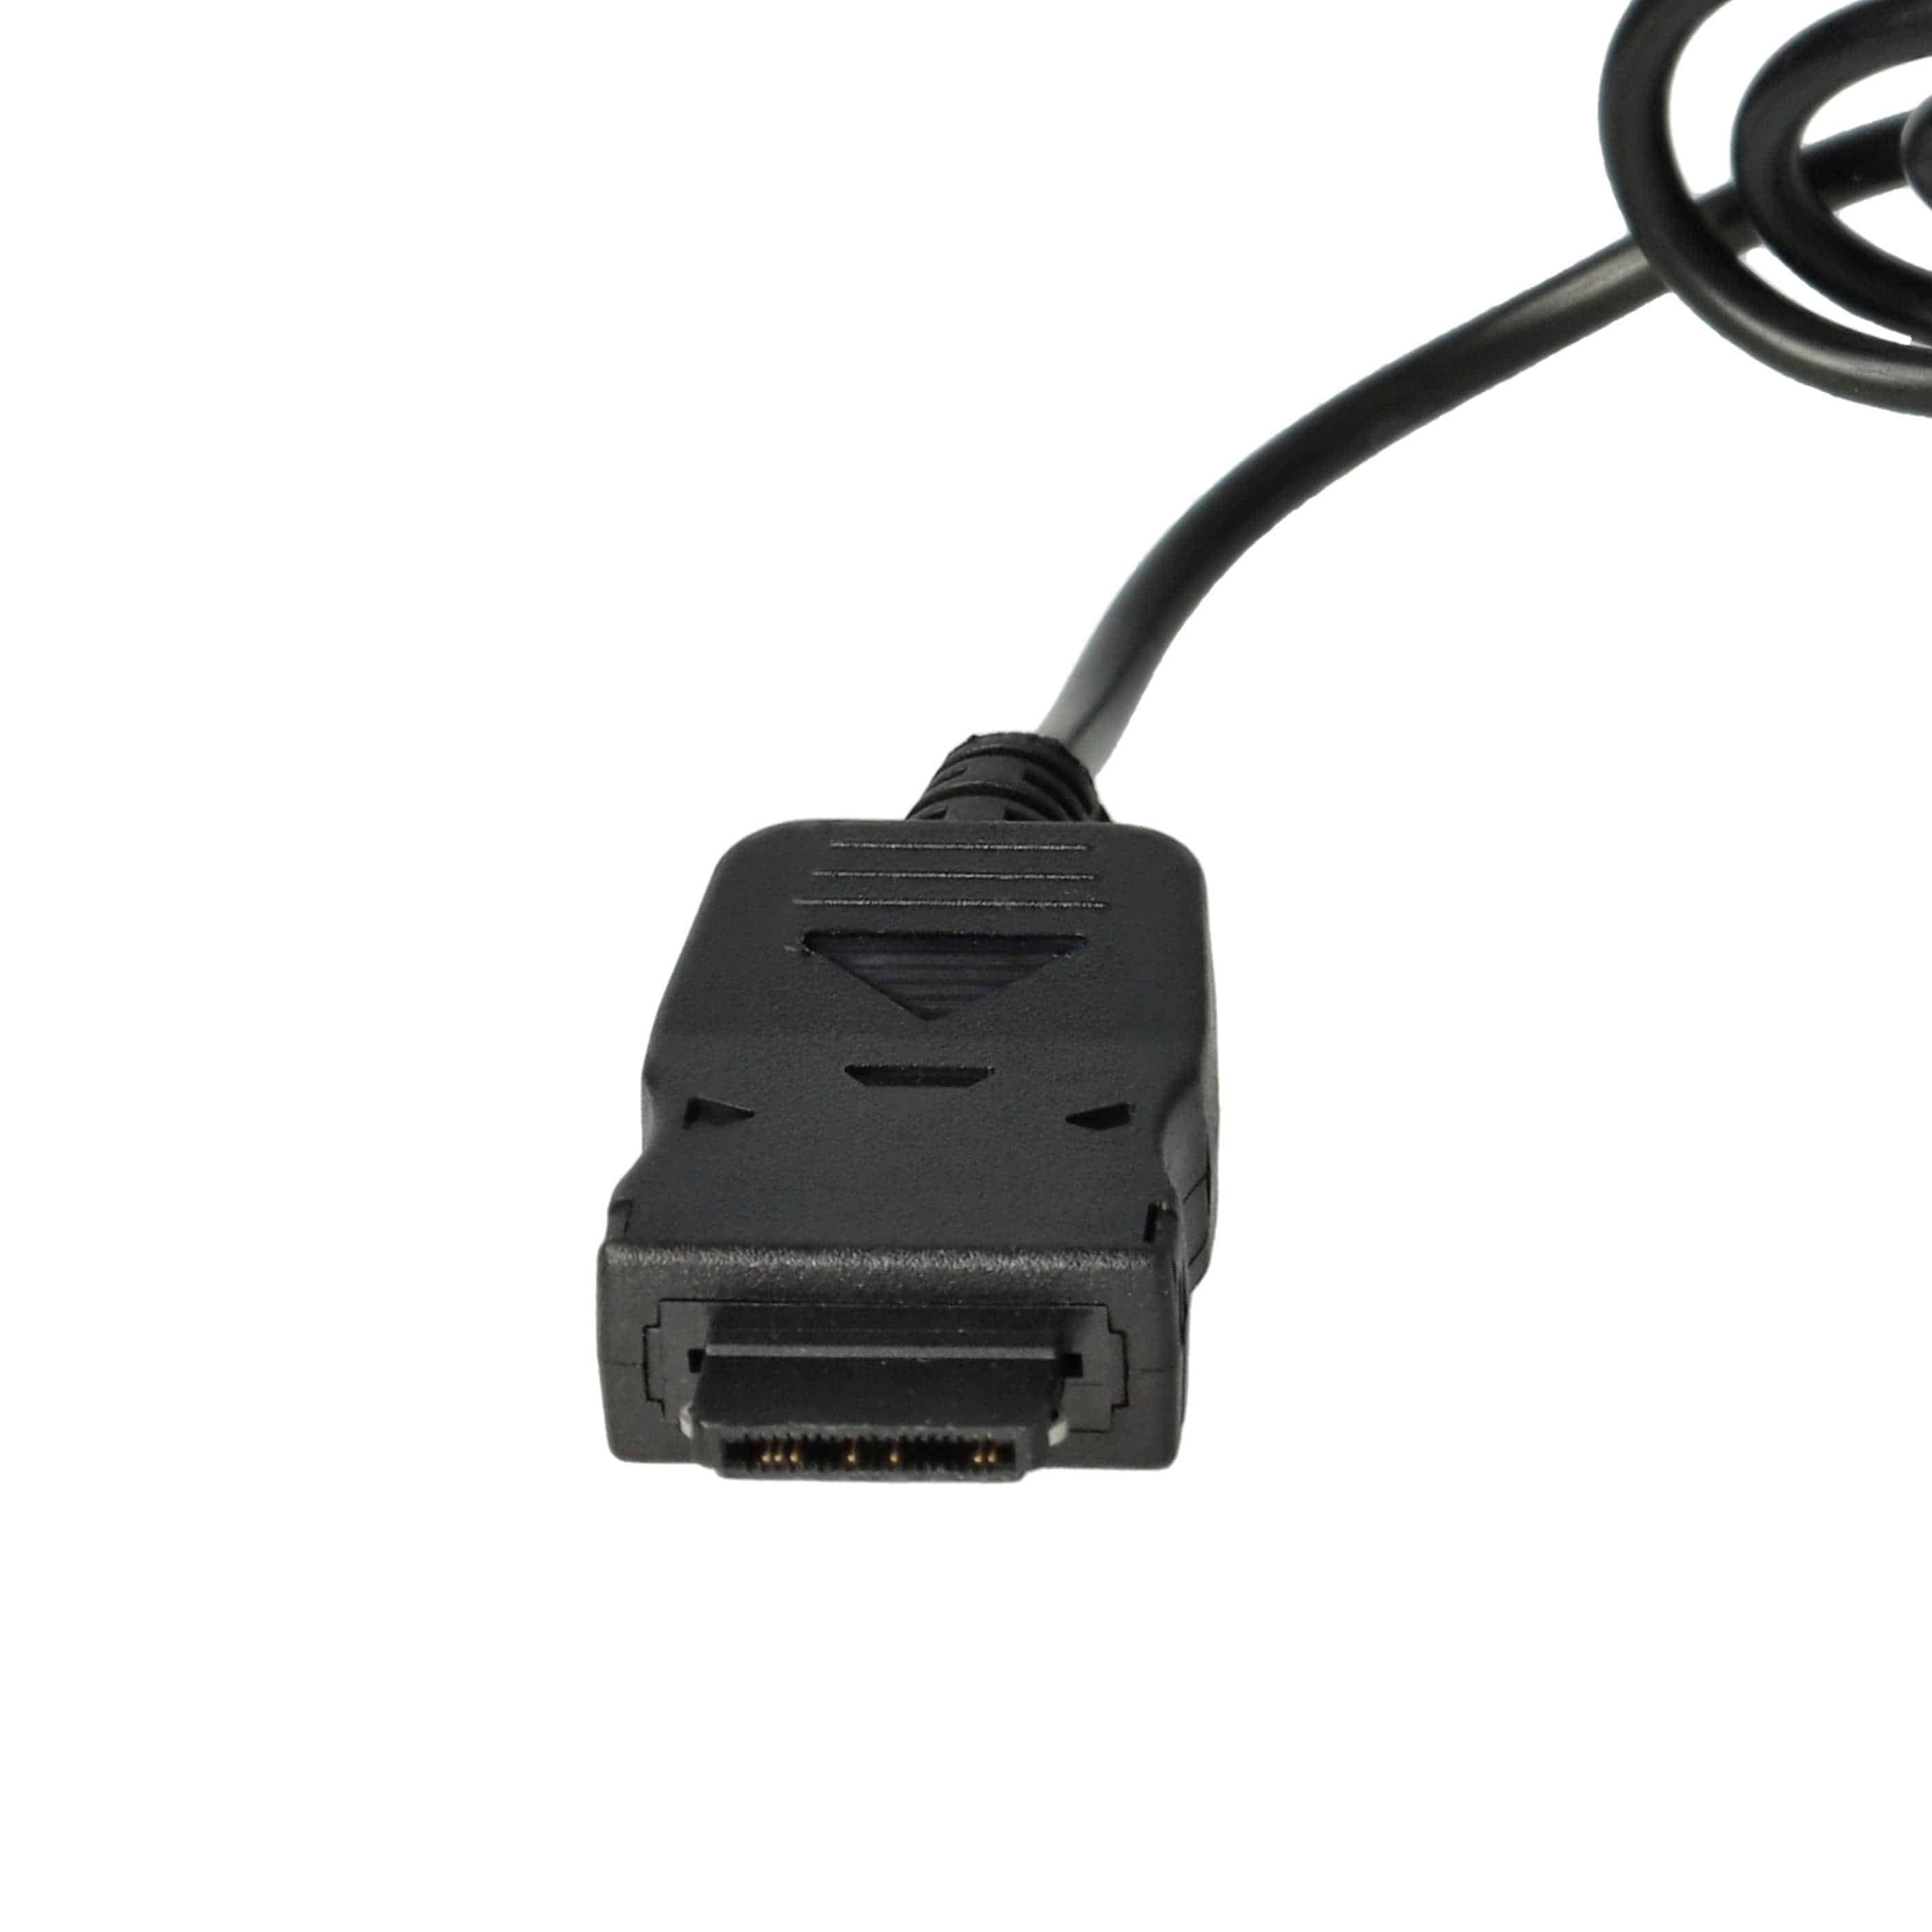 Charger 110-220 V for Anycool, Samsung D66Mobile Phone etc.